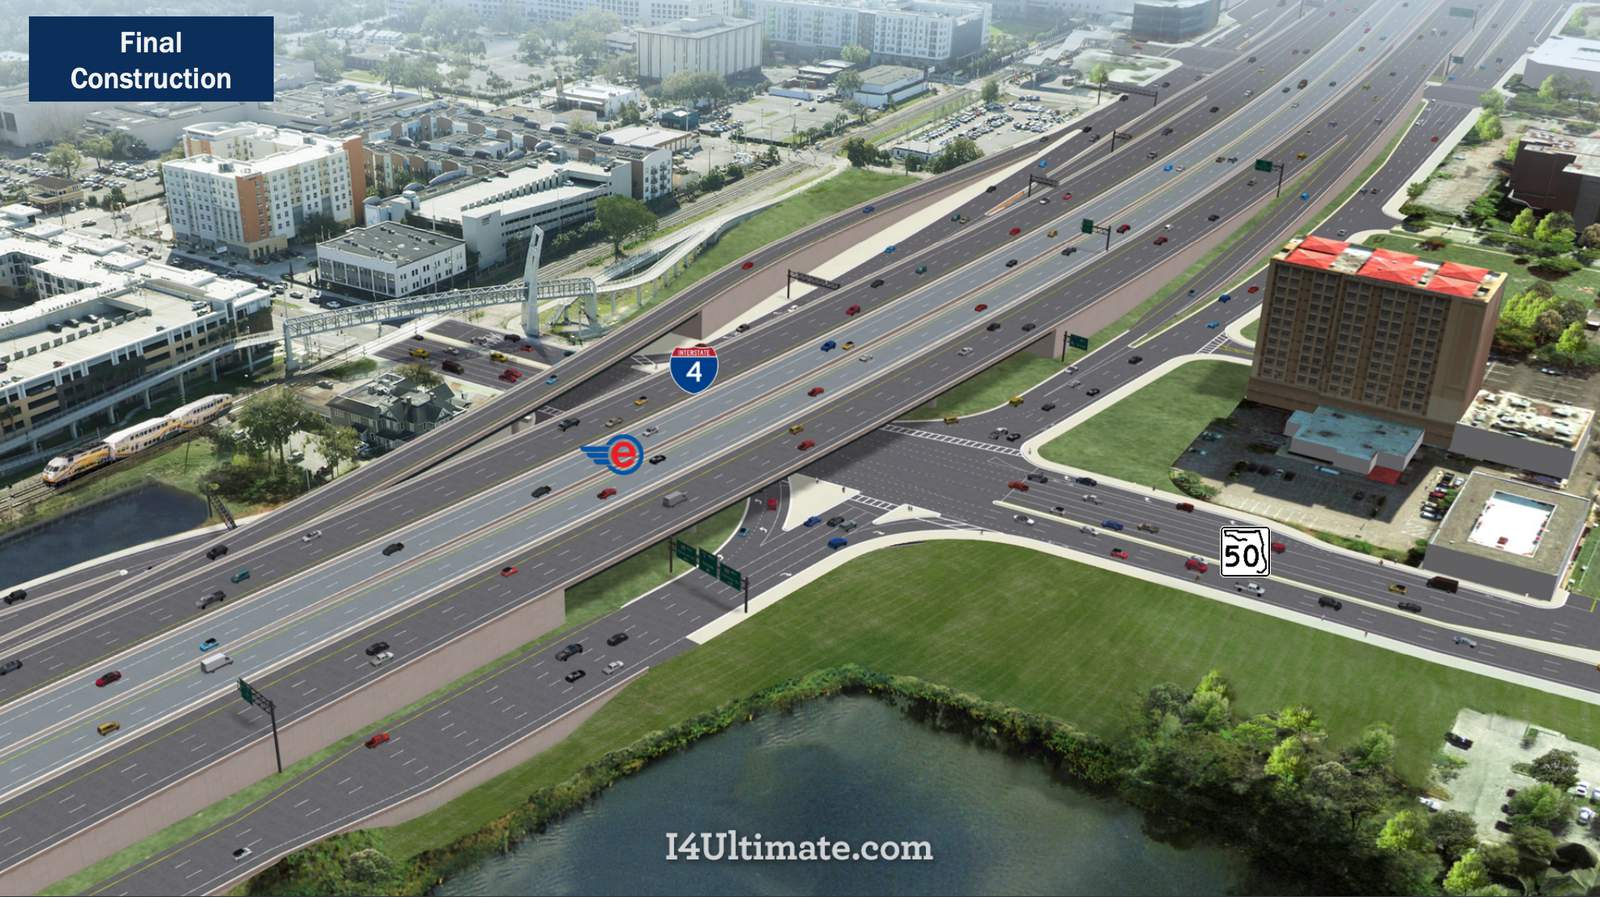 Traffic alert: I-4 Ultimate opening Colonial ramps in final alignments